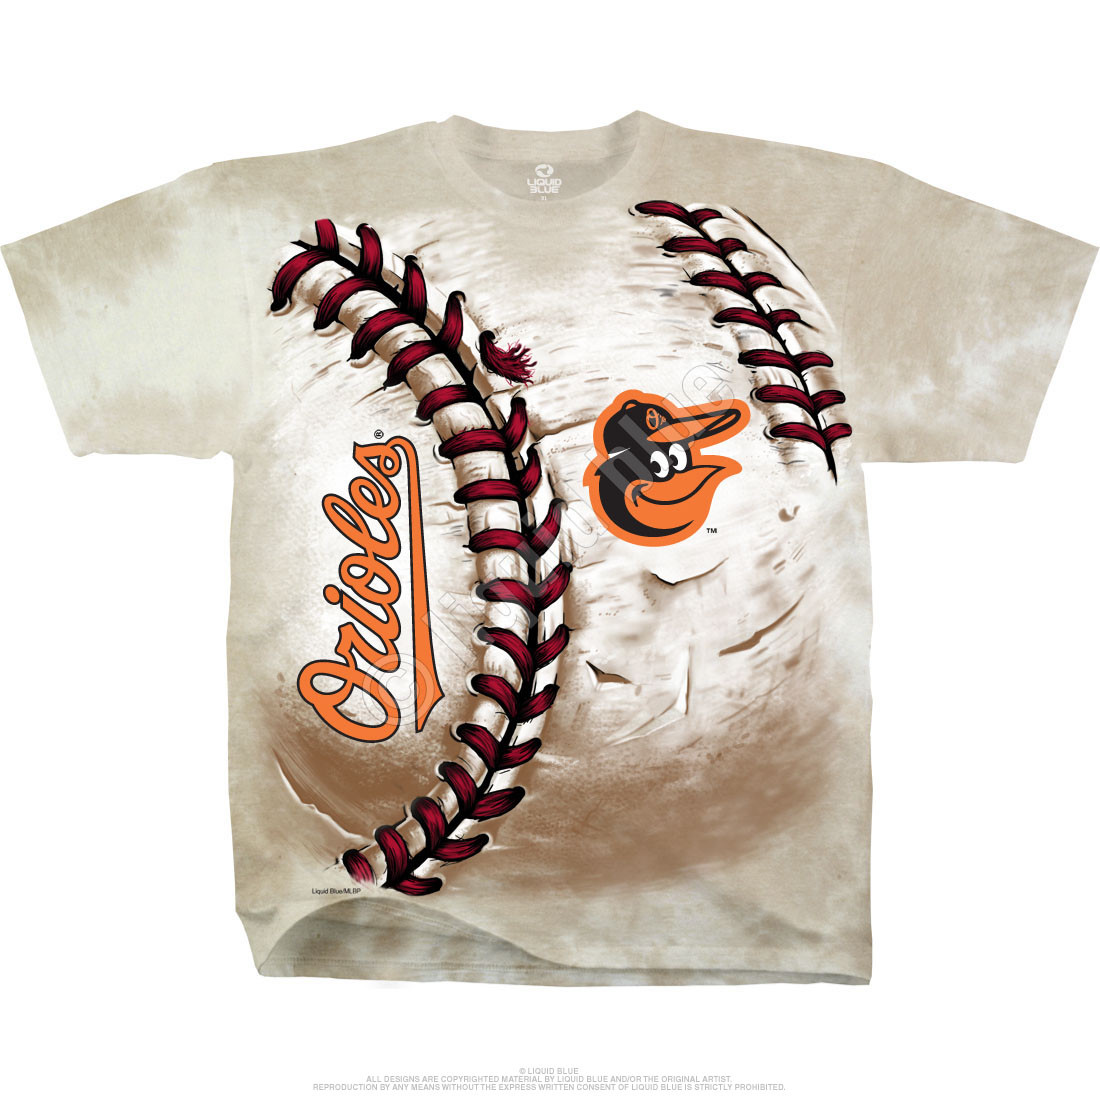 orioles 4th of july jersey